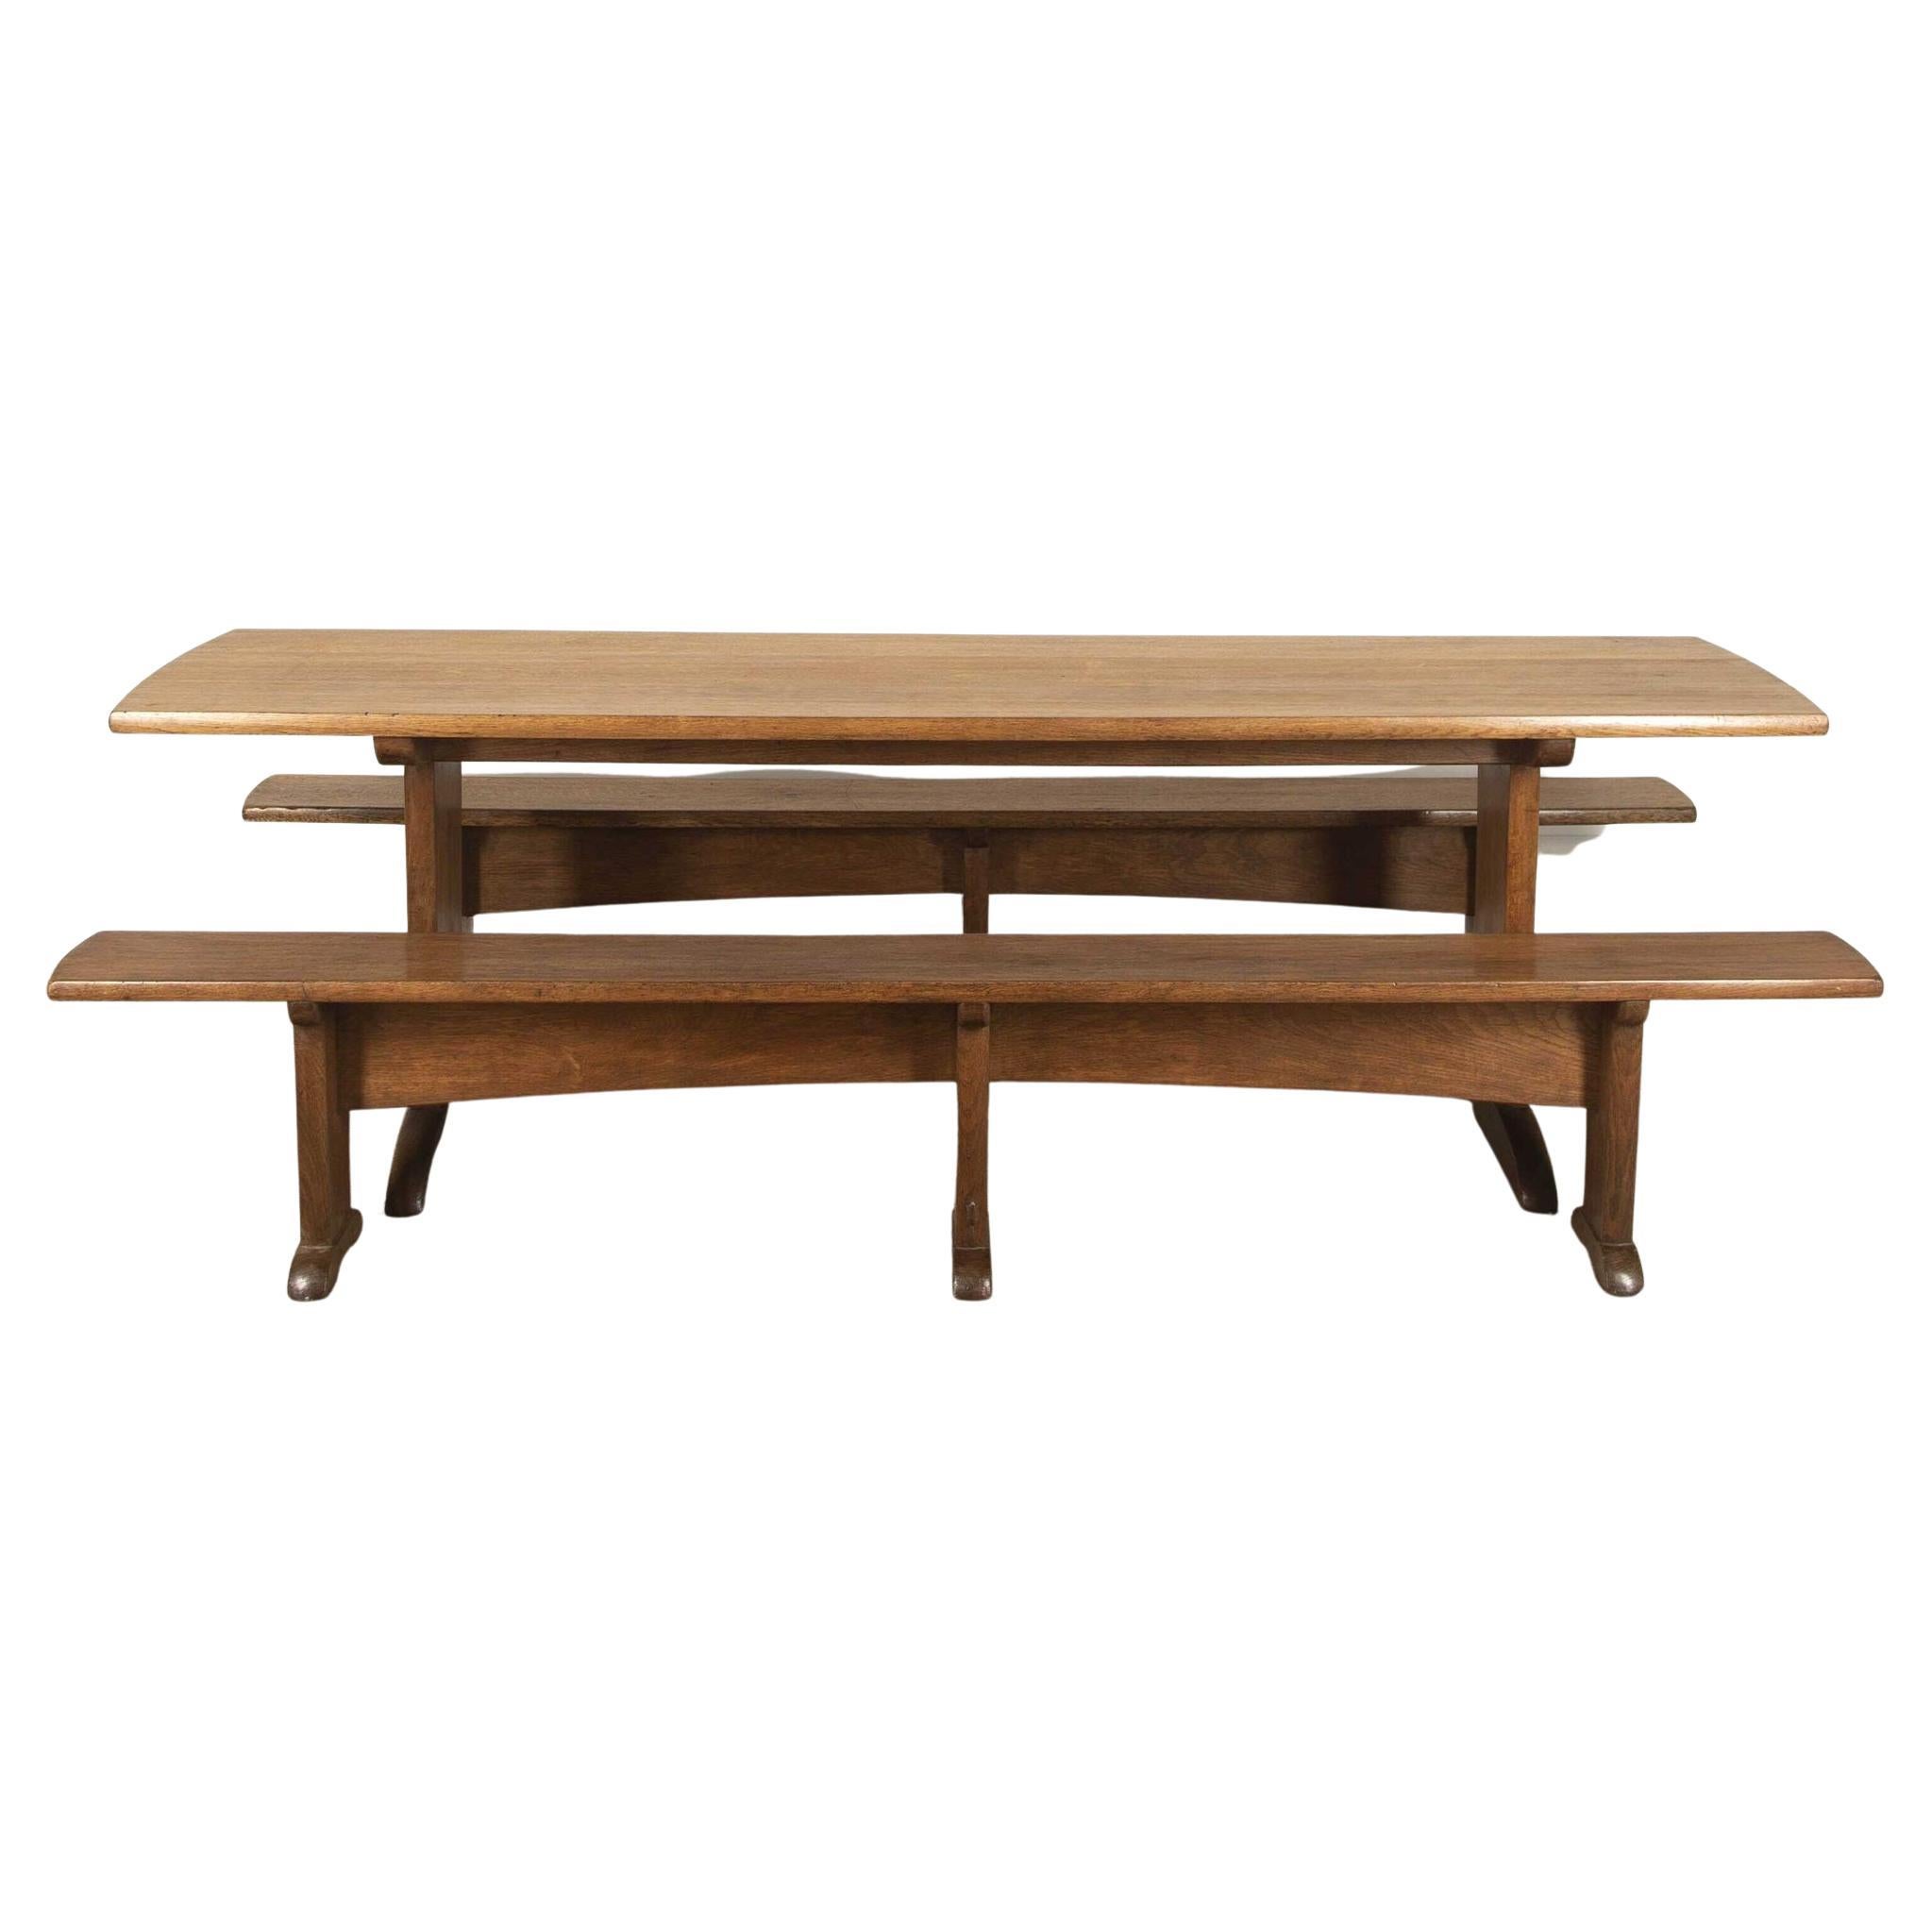 Beaverman Oak Table and Benches